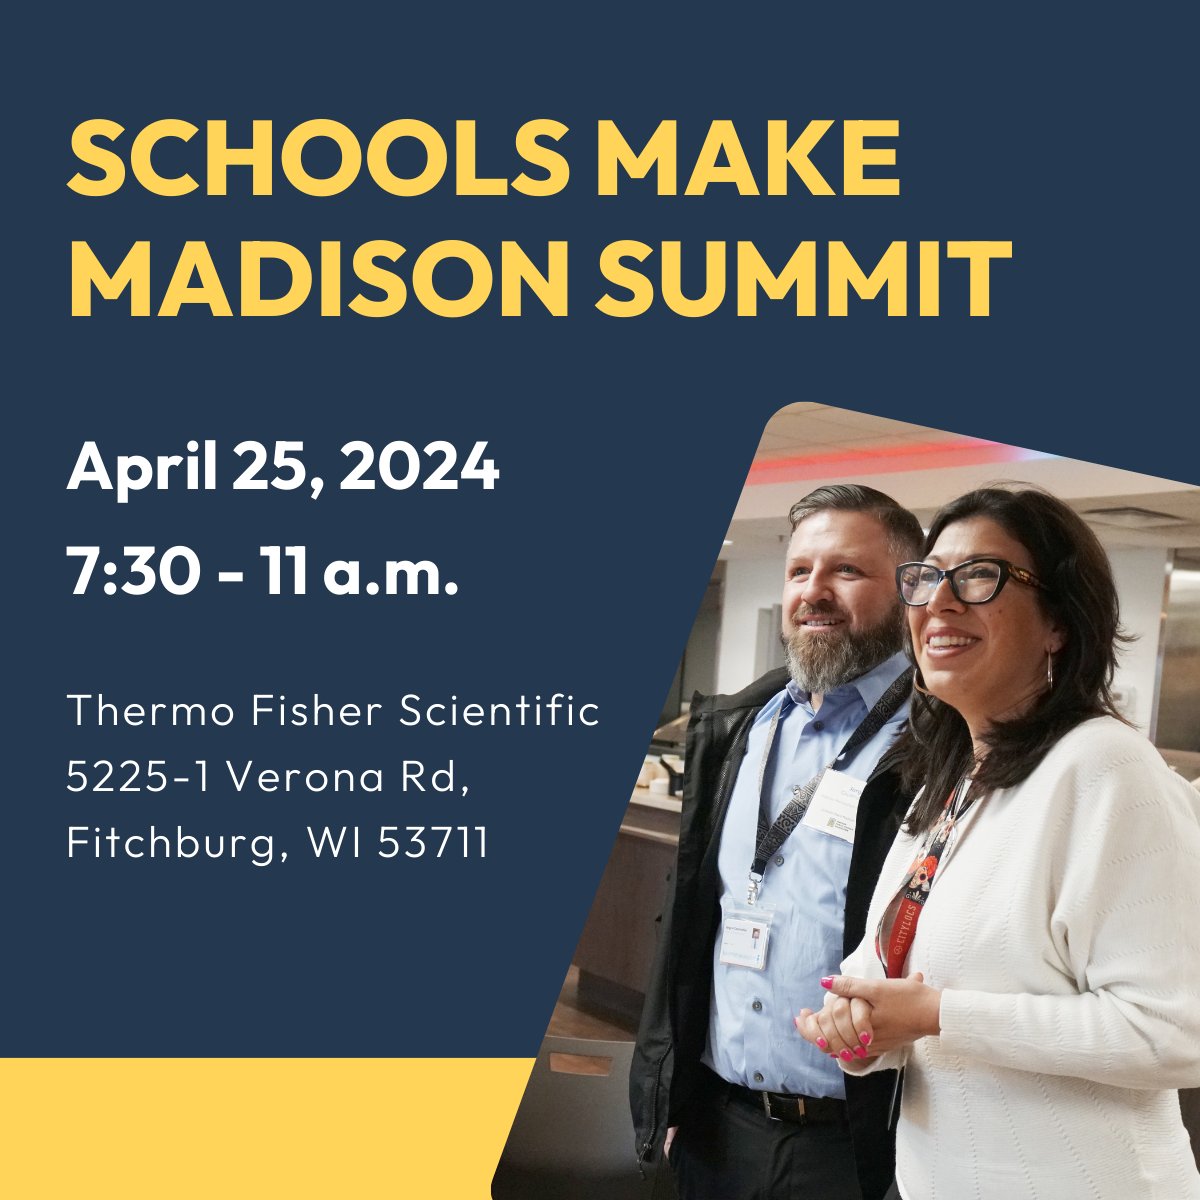 Hear from @mmsdschools experts who will provide insights into the reality of school funding and budgets, gain an understanding of the role social workers play in student success, and learn about the school nutrition program. Sign up for free now: bit.ly/MPSFSummitRegi….